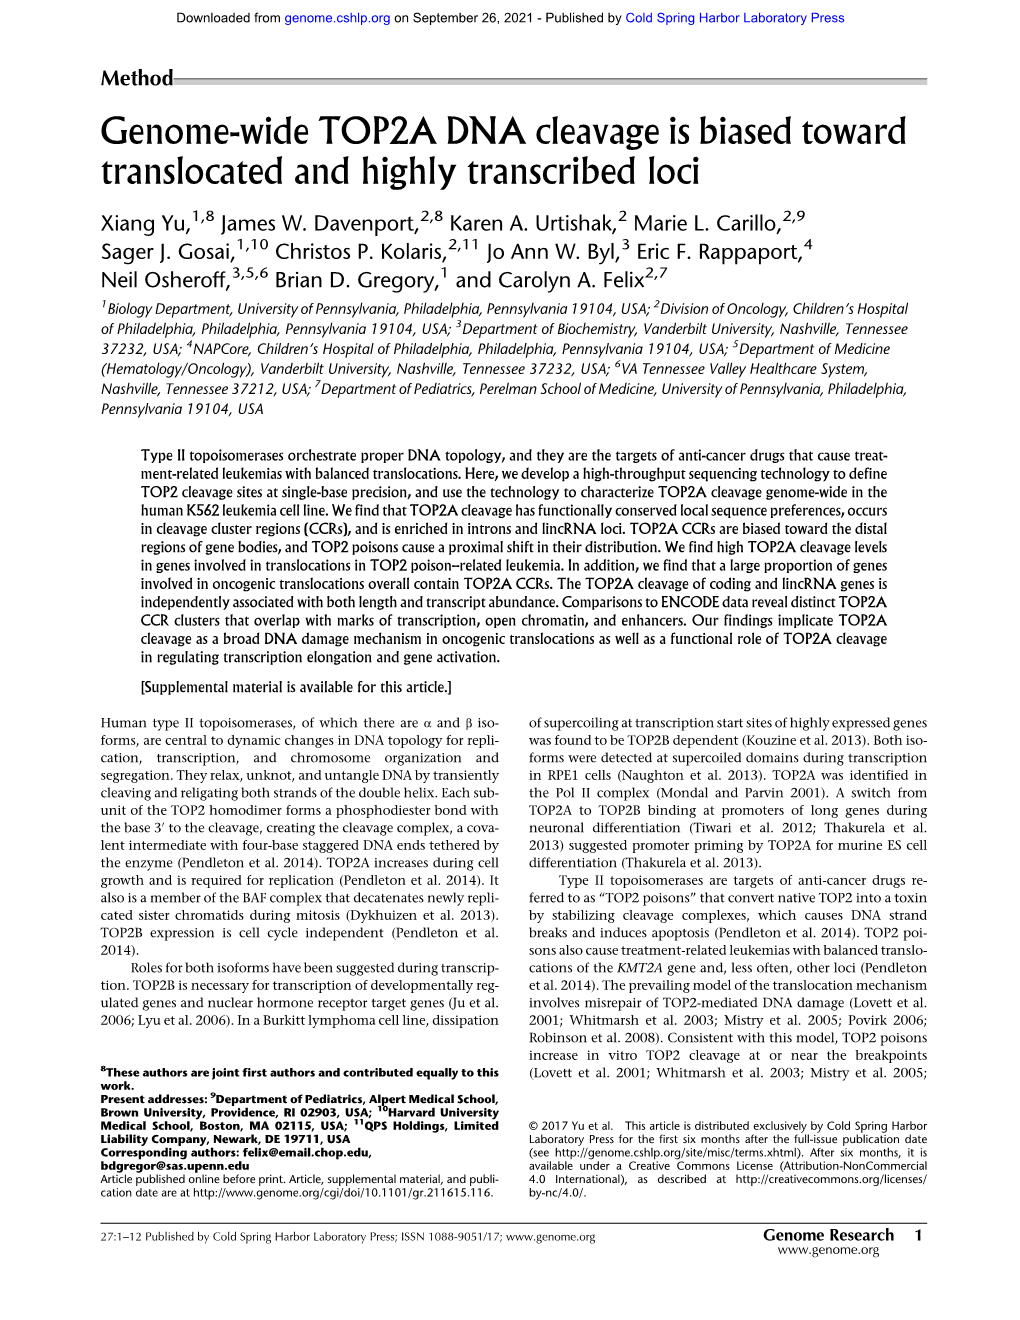 Genome-Wide TOP2A DNA Cleavage Is Biased Toward Translocated and Highly Transcribed Loci